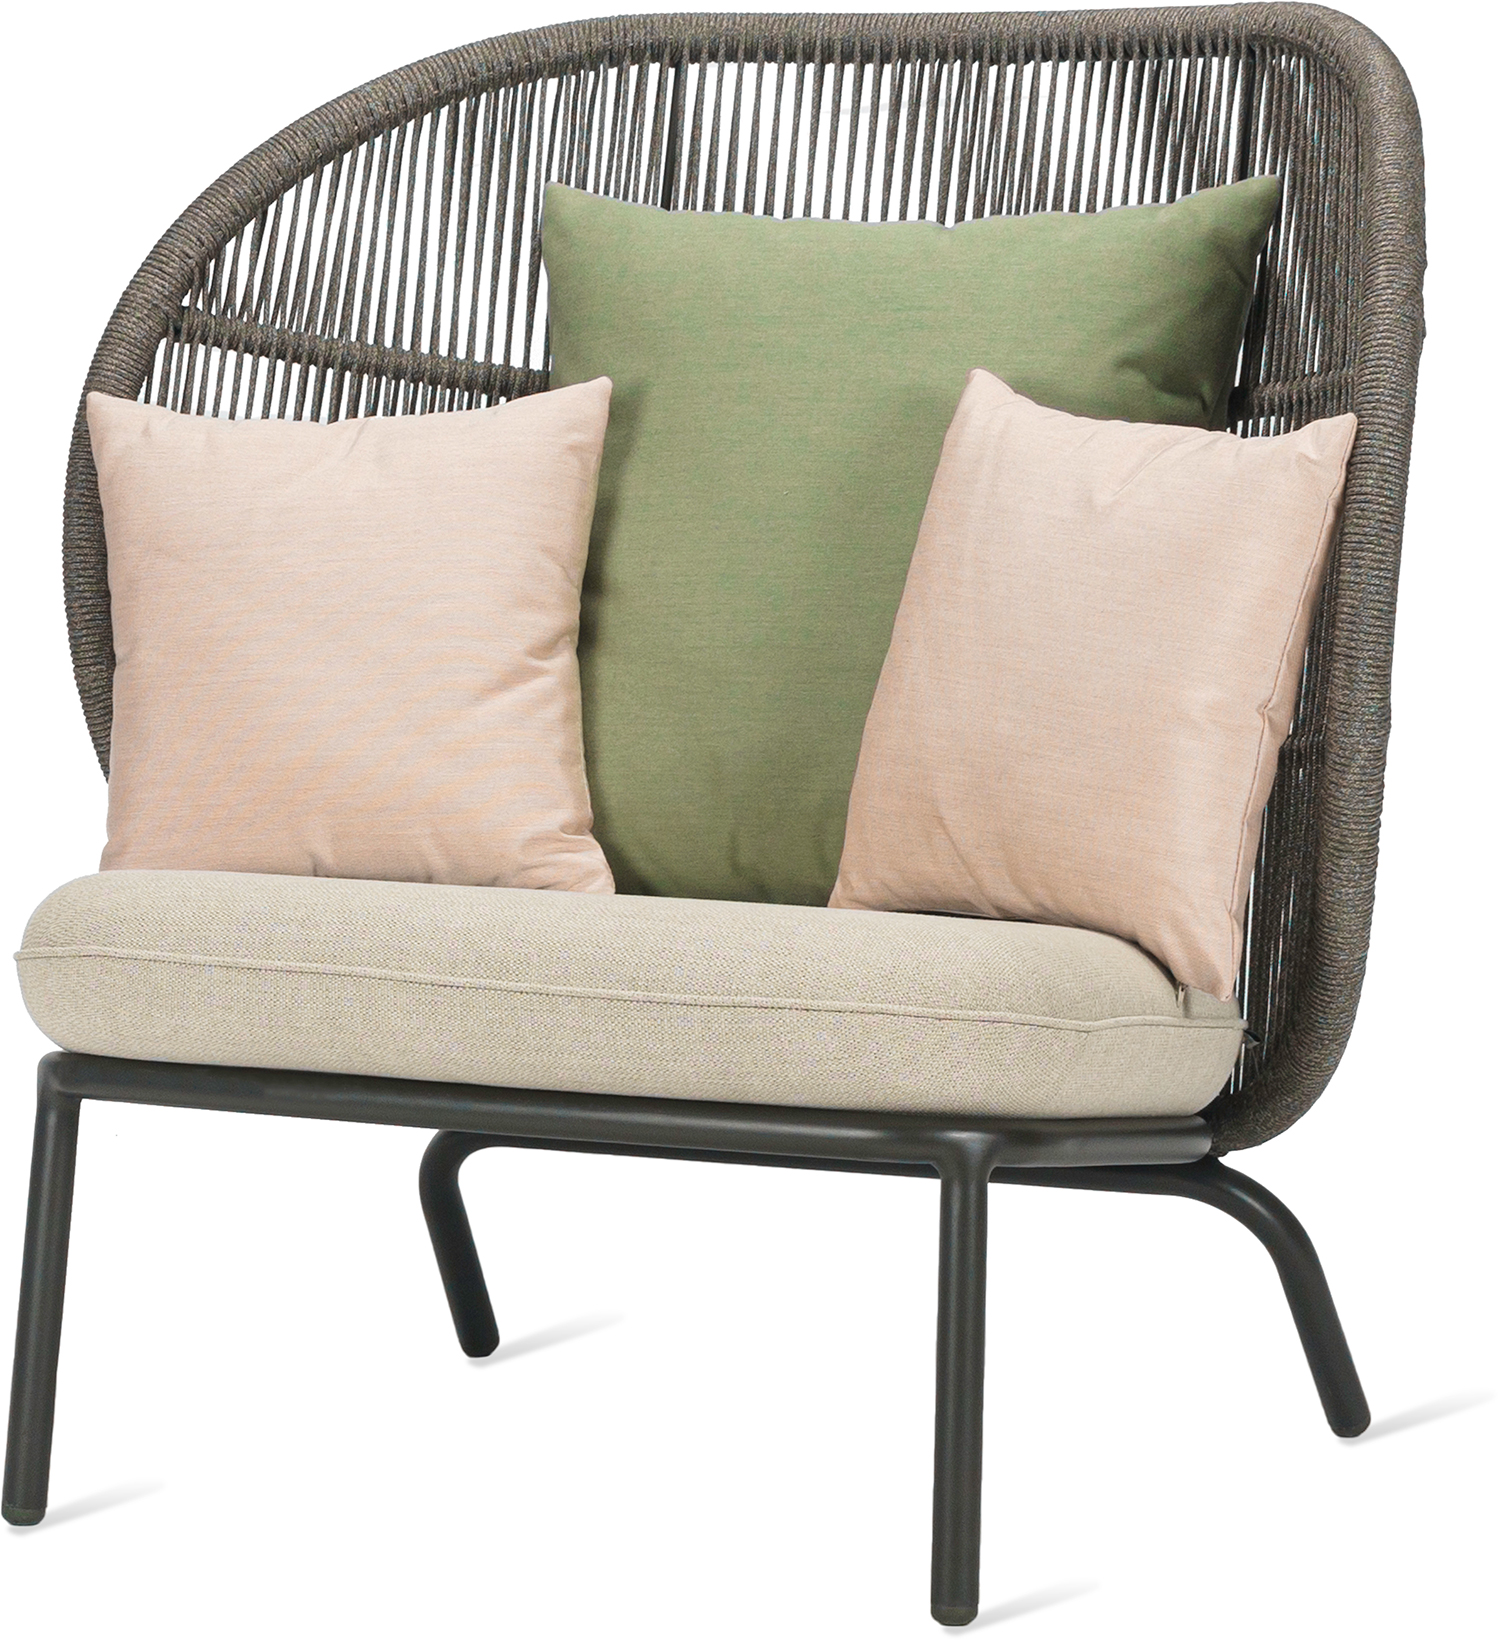 Vincent Sheppard Kodo Cocoon Fossil Grey Chair Almond